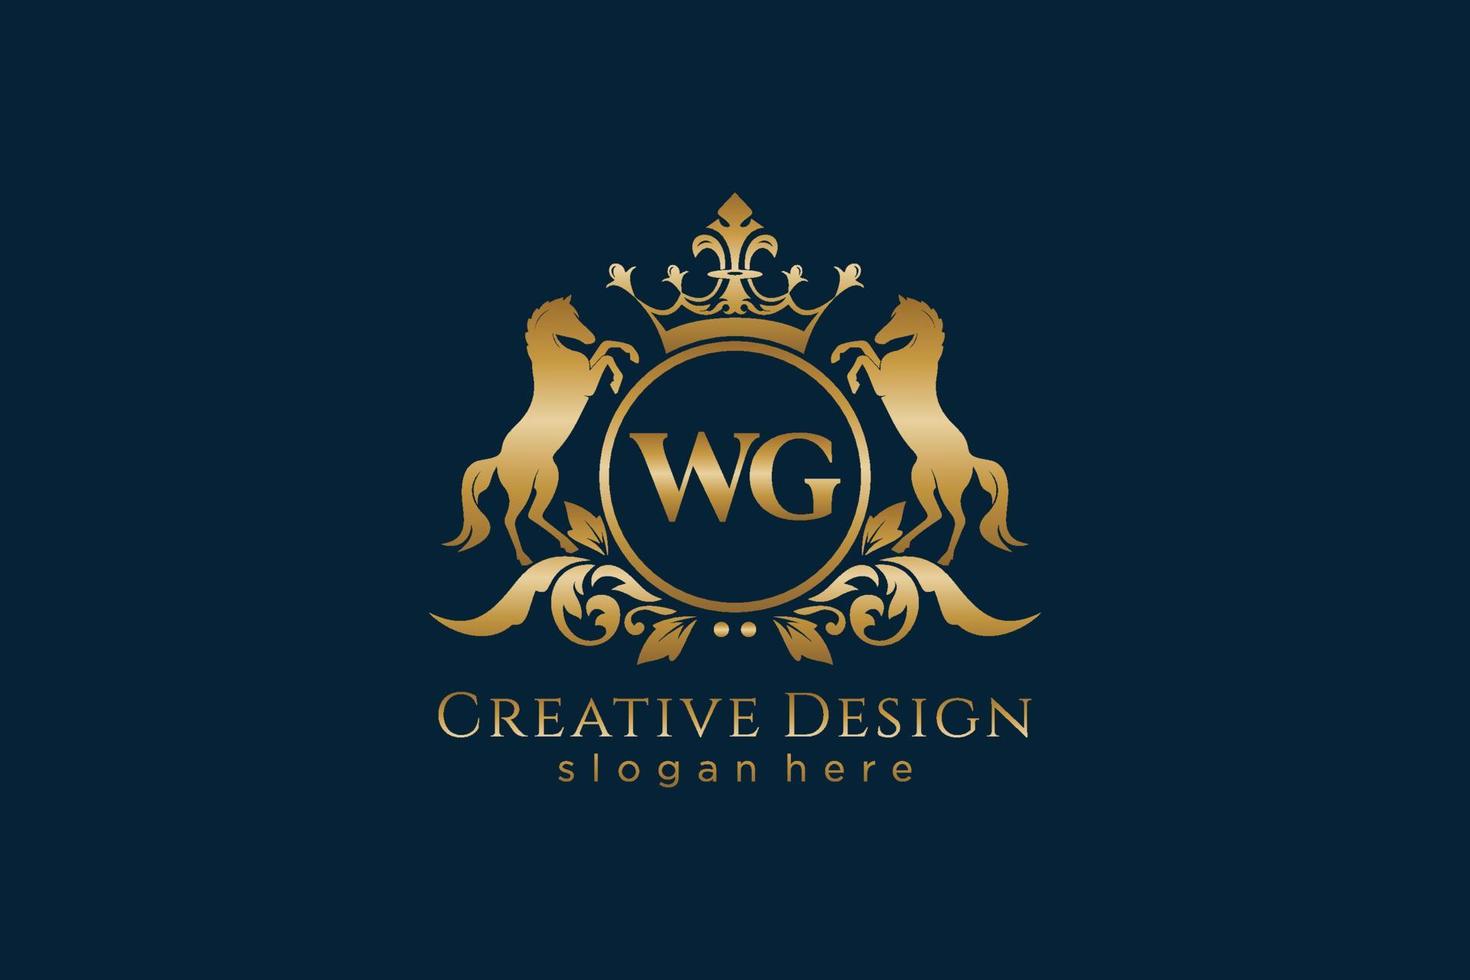 initial WG Retro golden crest with circle and two horses, badge template with scrolls and royal crown - perfect for luxurious branding projects vector